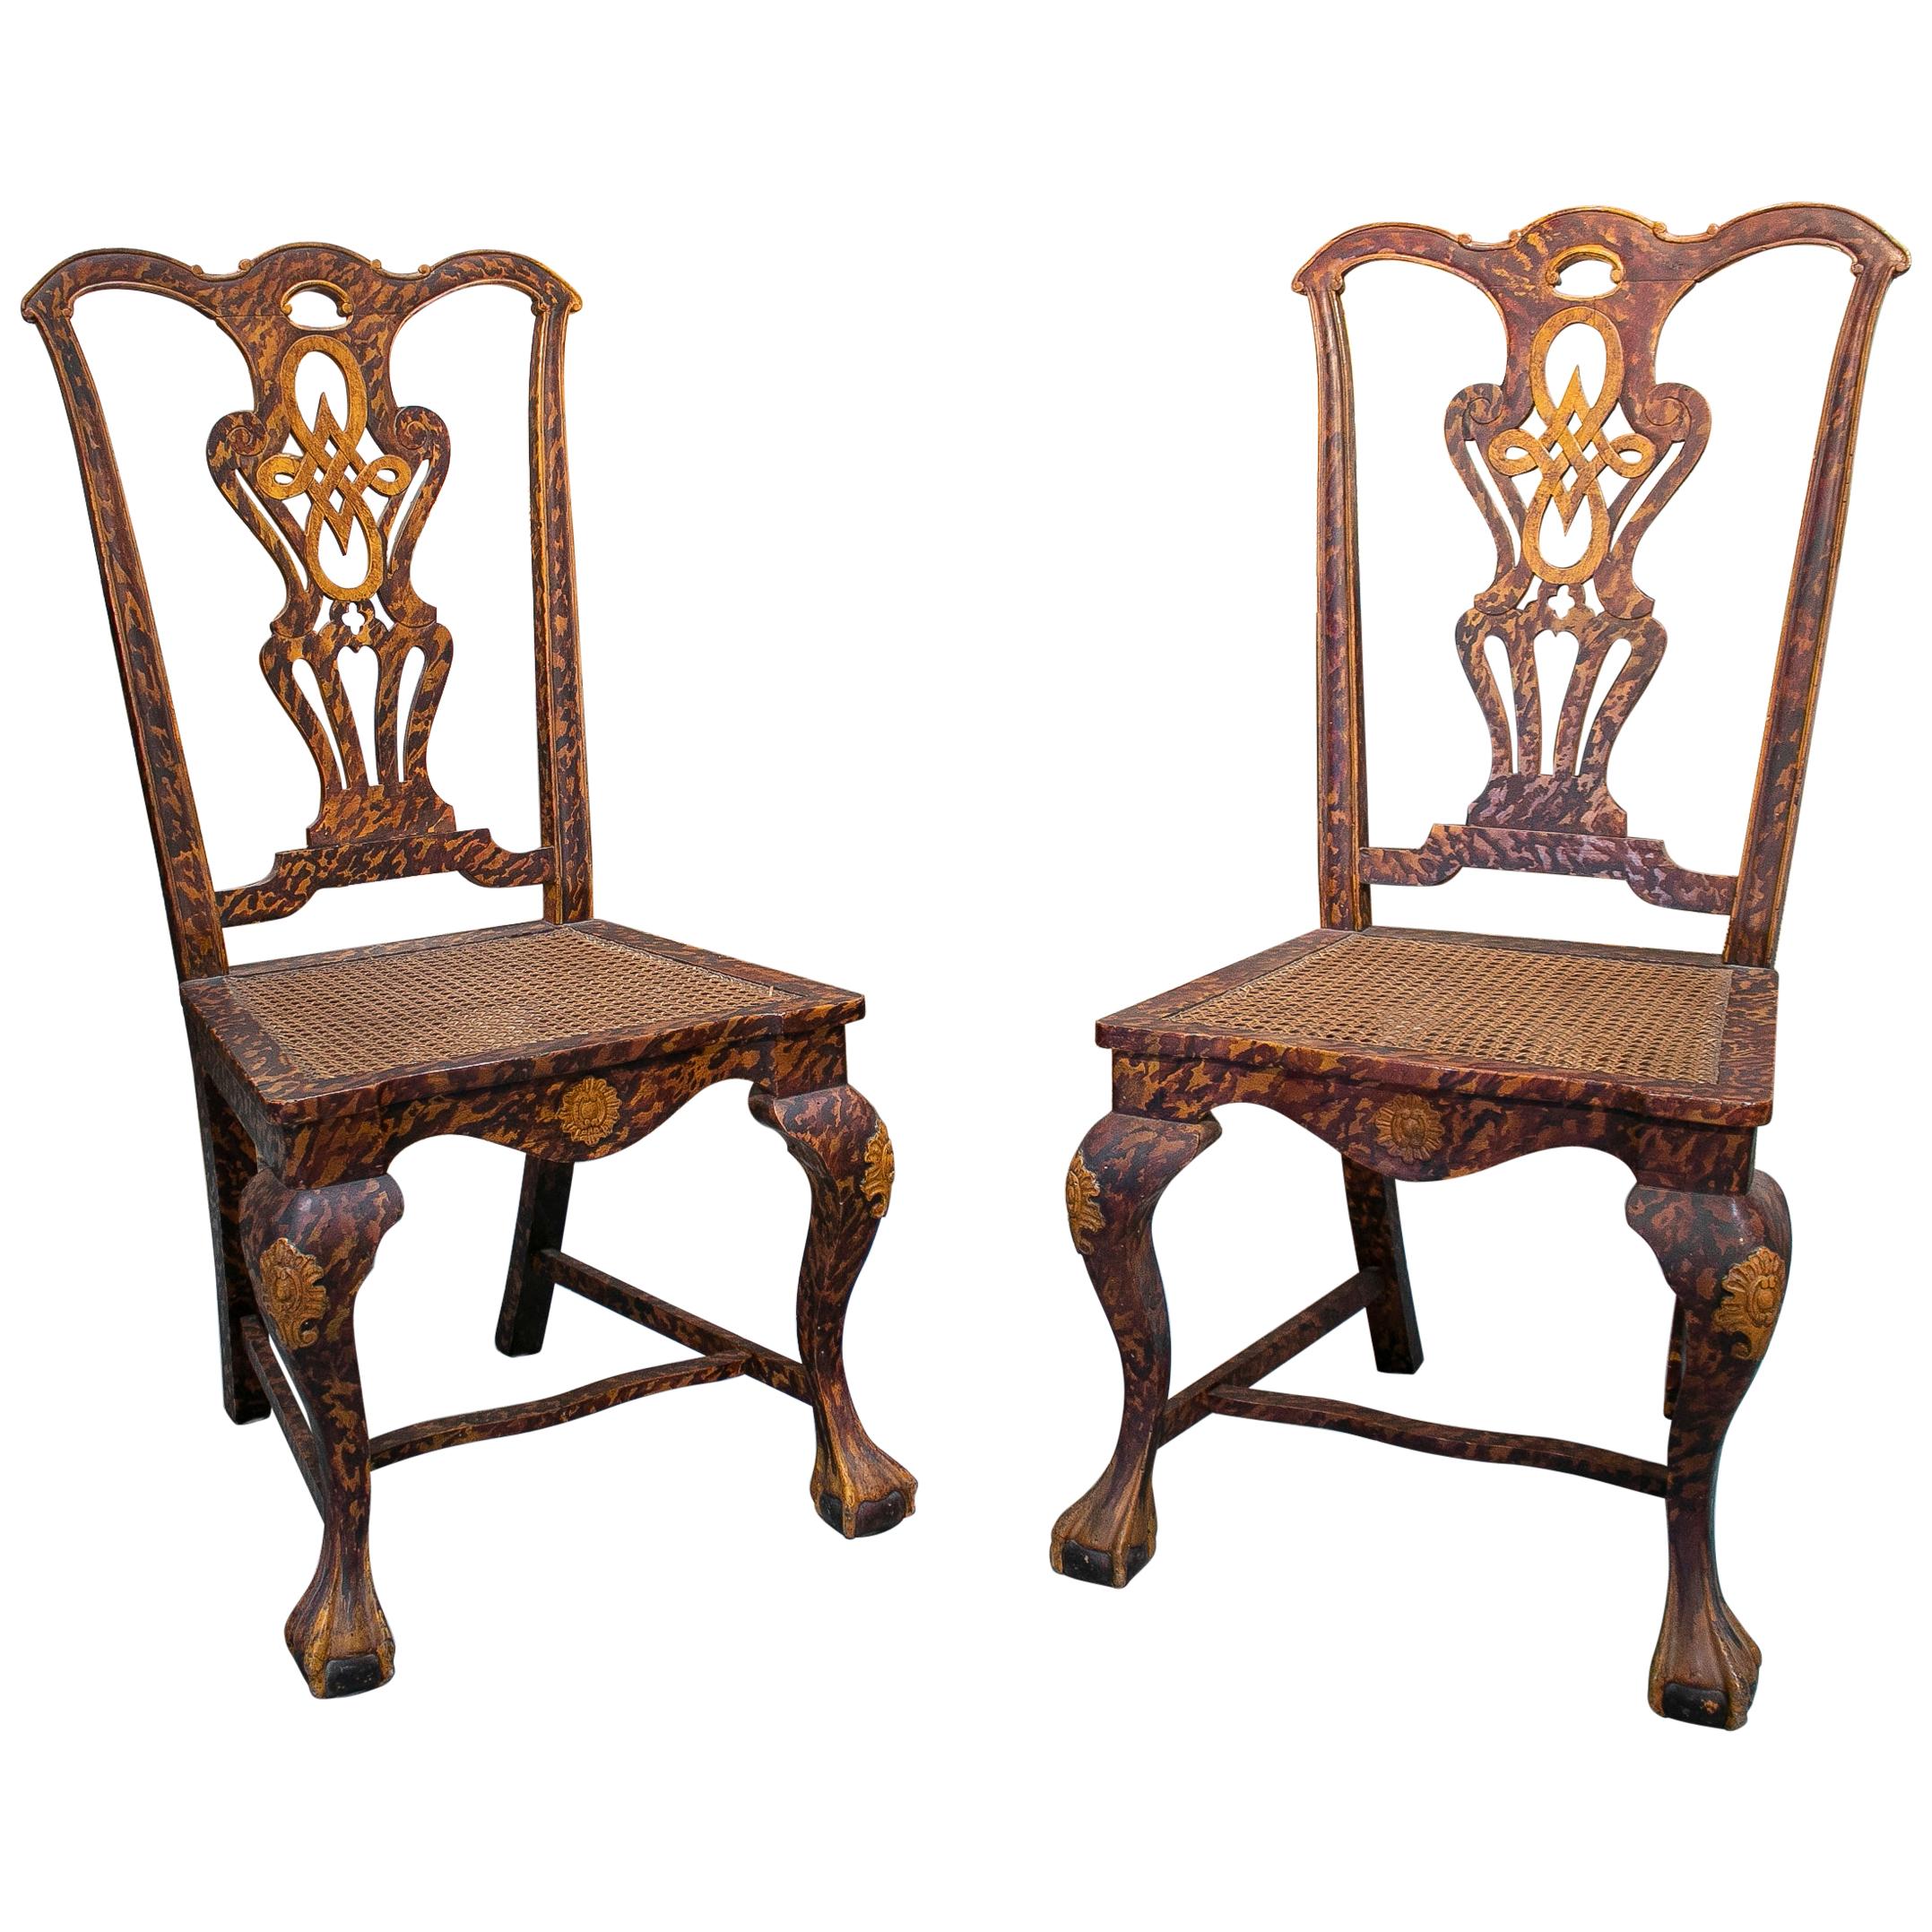 Late 19th Century Pair of English Chippendale Style Chairs with Faux Marbling